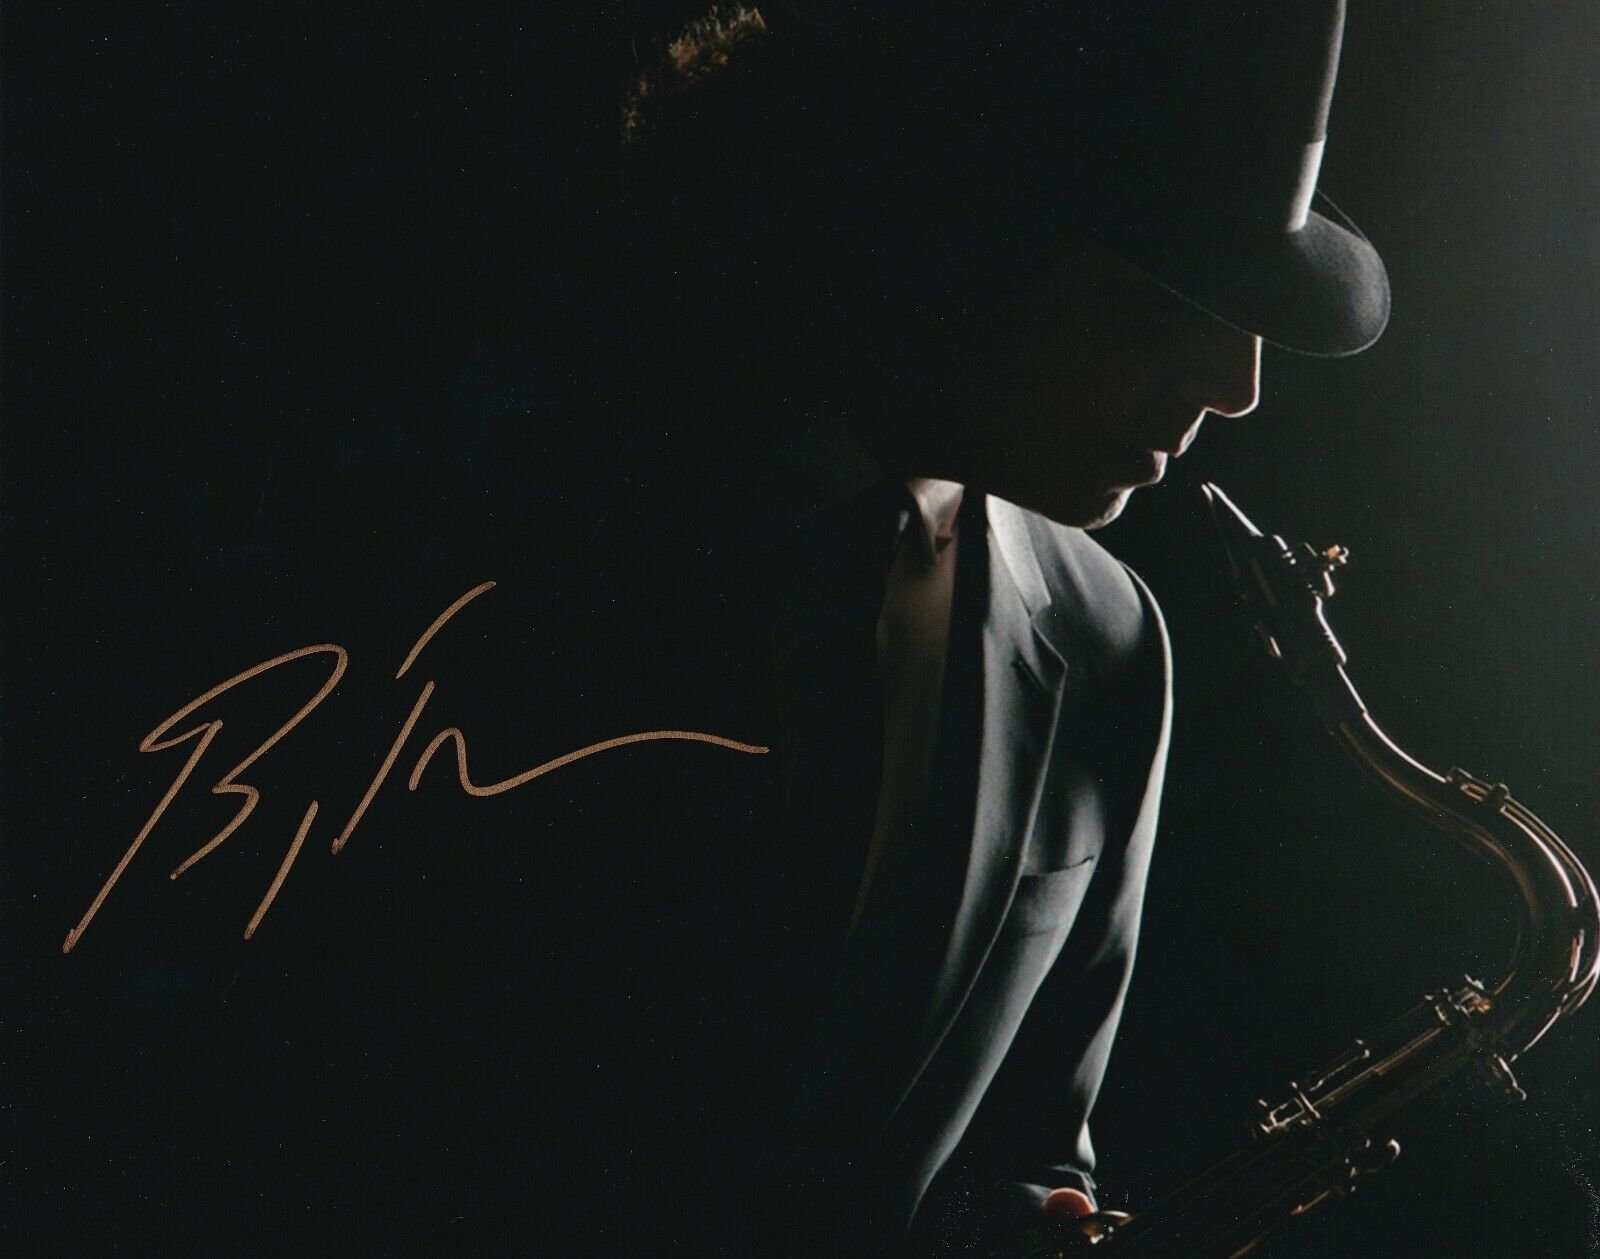 Boney James REAL hand SIGNED Photo Poster painting #2 COA Autographed Saxophonist